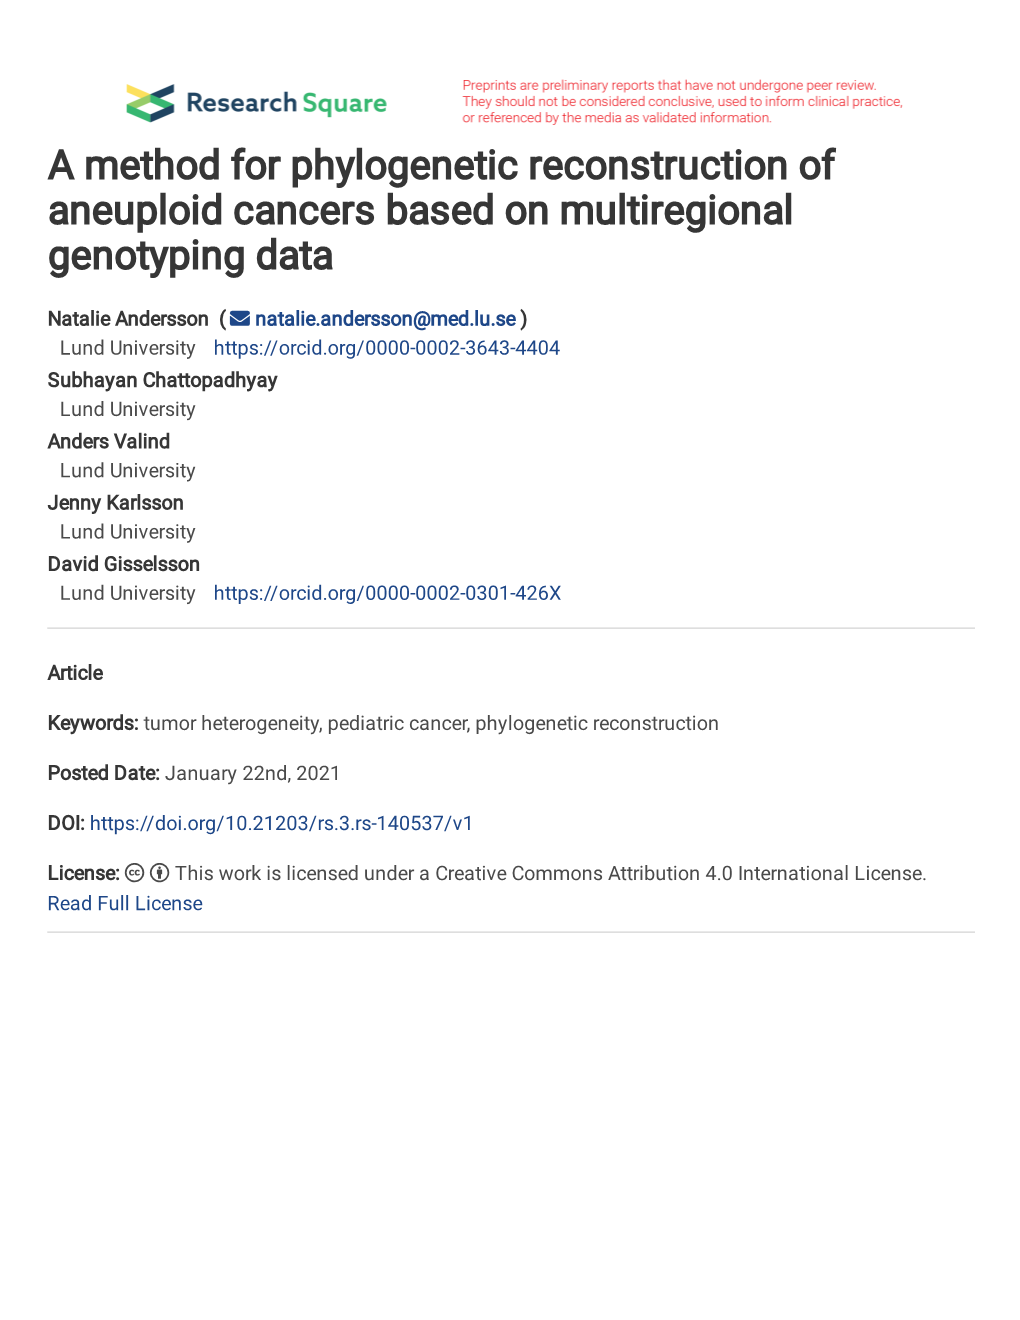 A Method for Phylogenetic Reconstruction of Aneuploid Cancers Based on Multiregional Genotyping Data